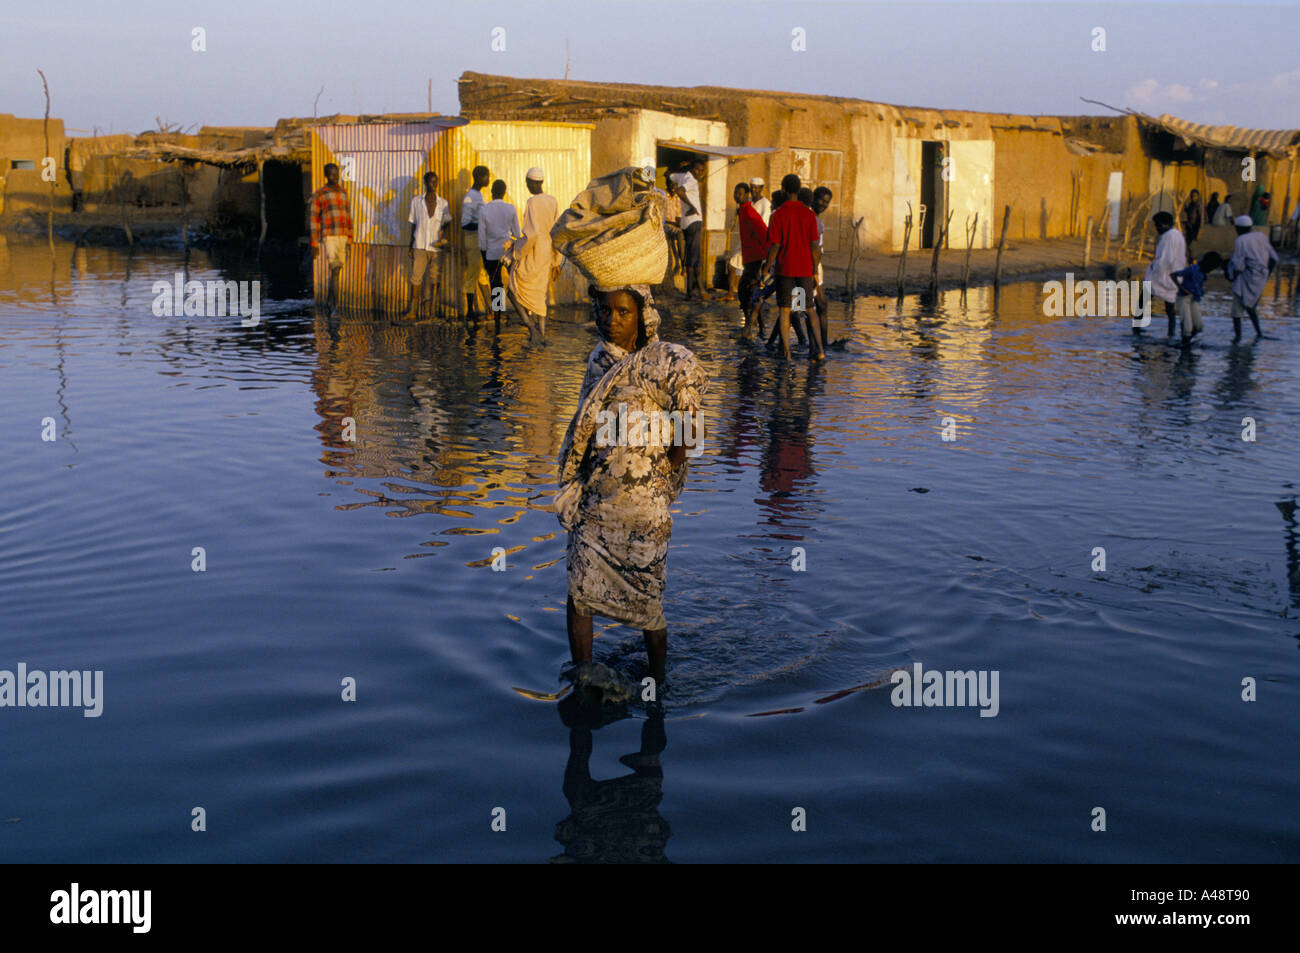 People wade through floodwater in Omdurman Khartoum after the nile burst its banks and flooded the city Stock Photo